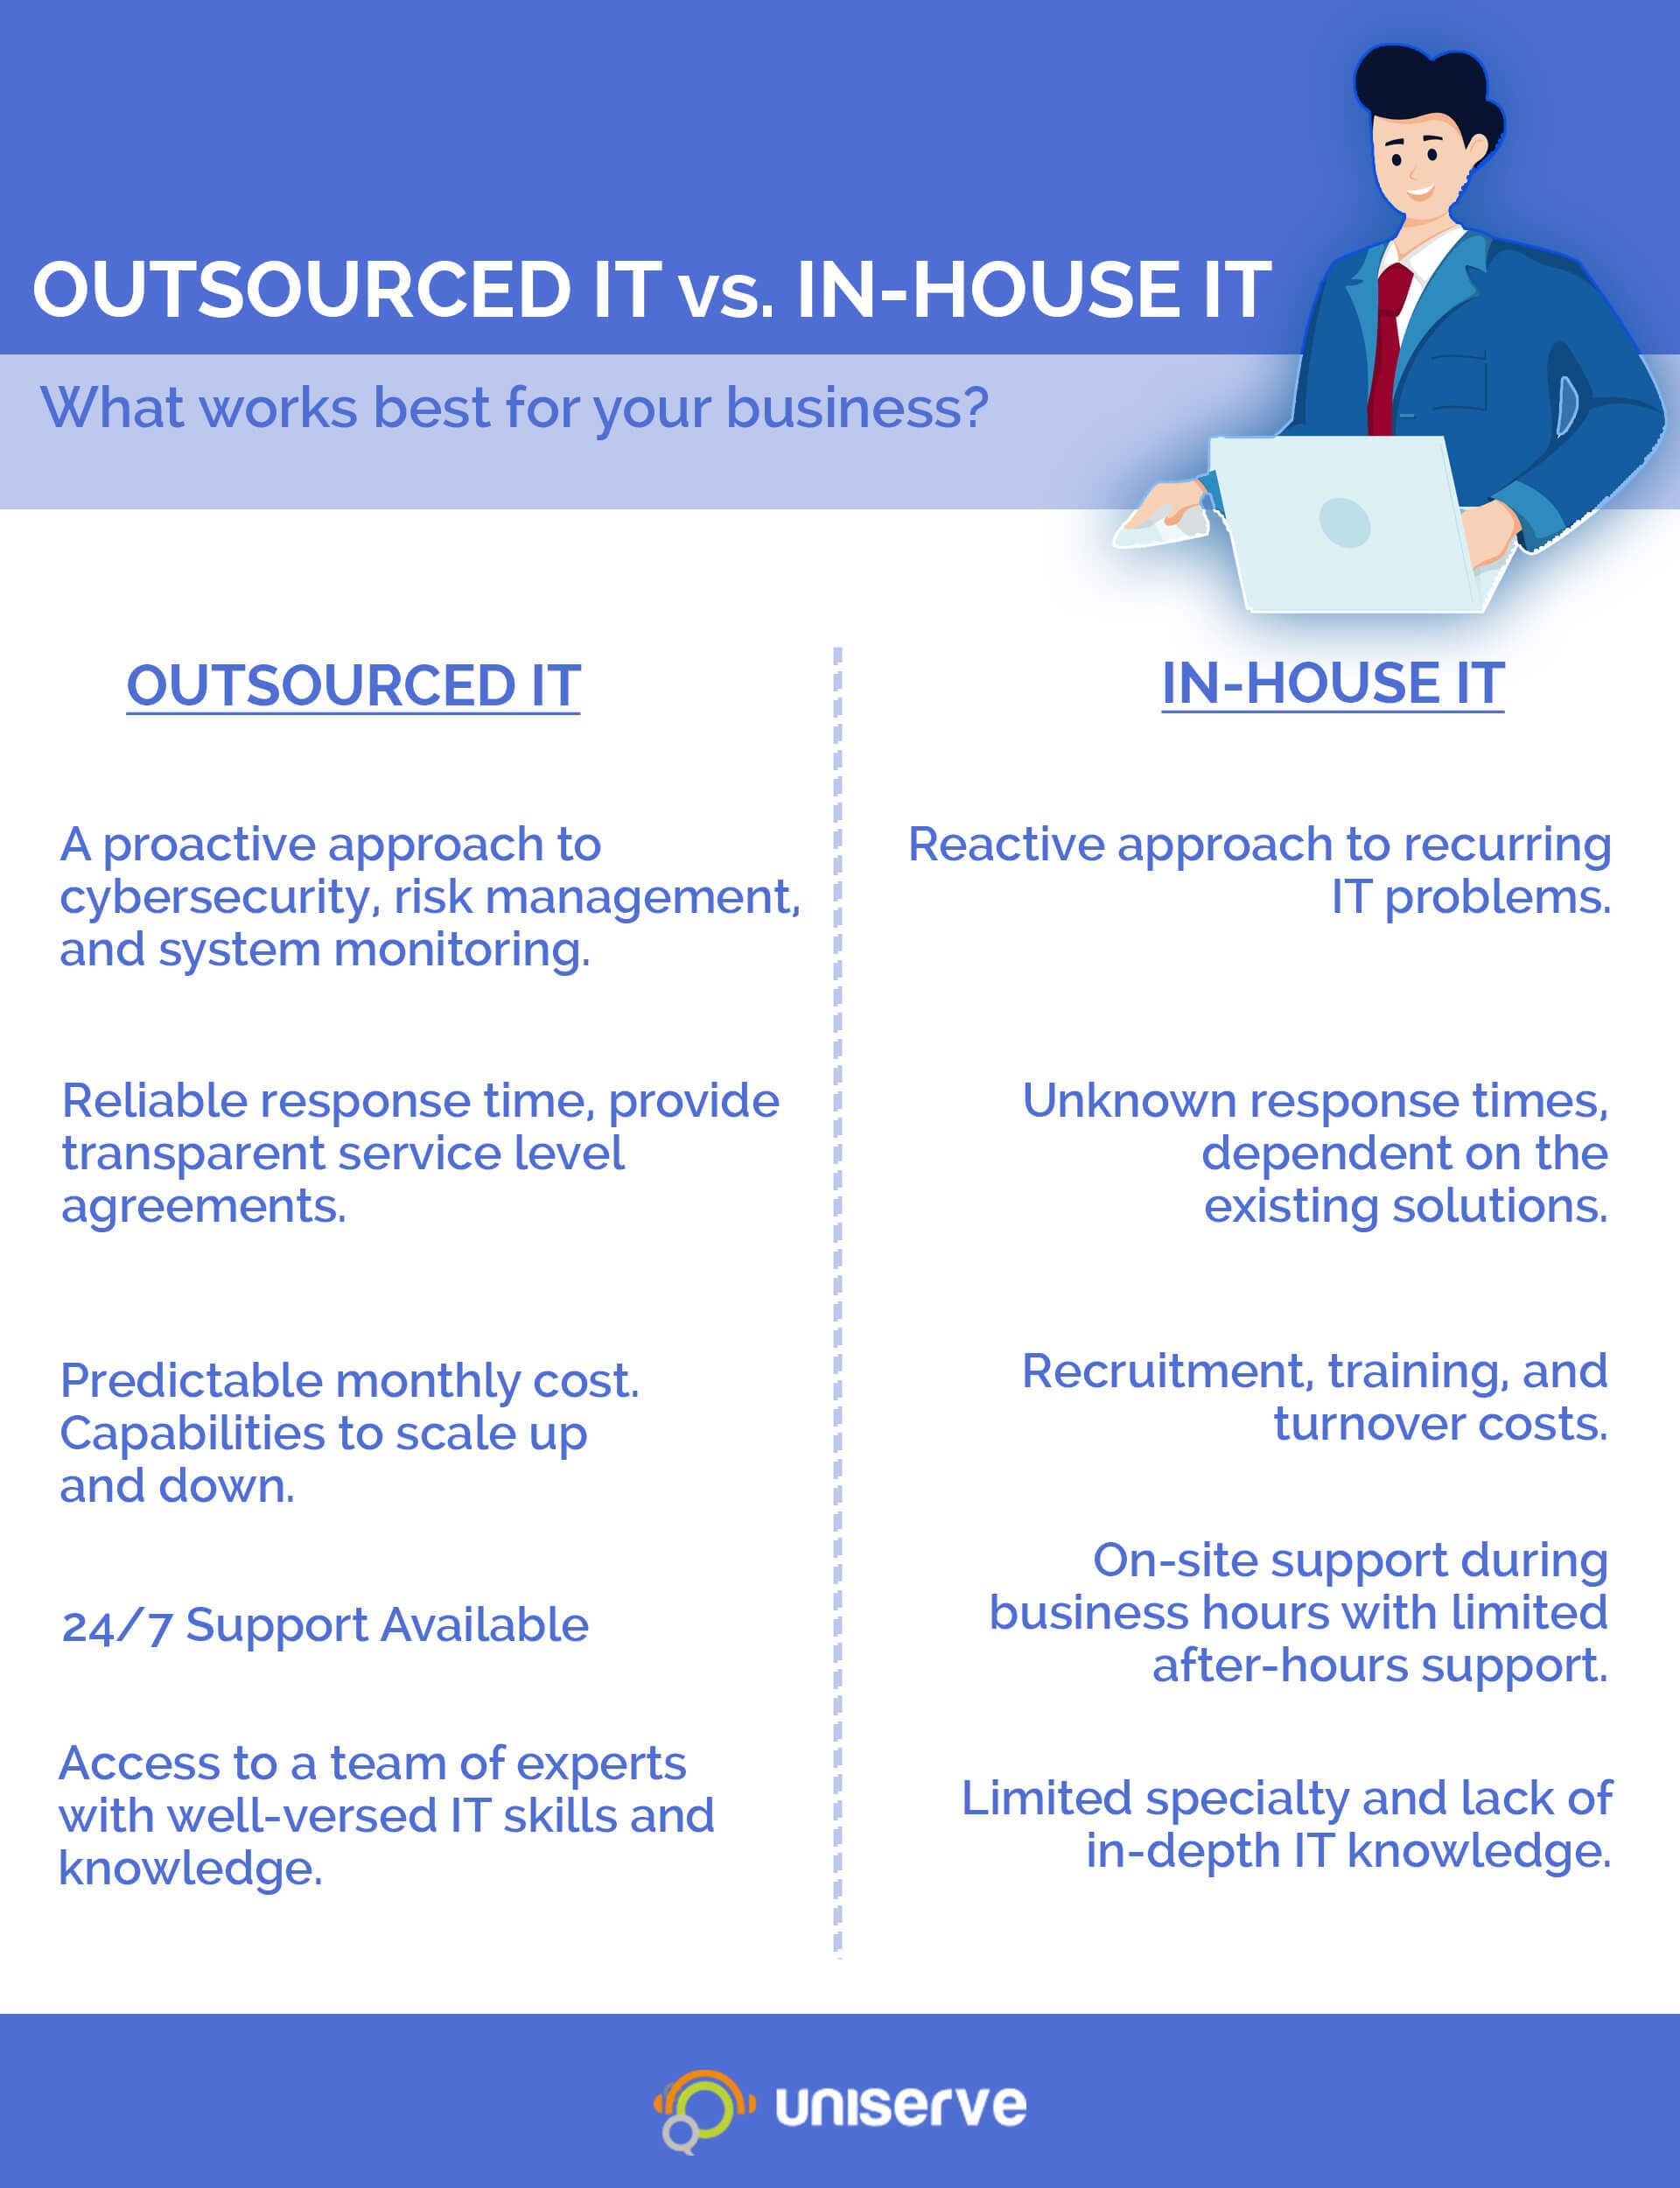 Comparison between Outsourced IT and In-House IT